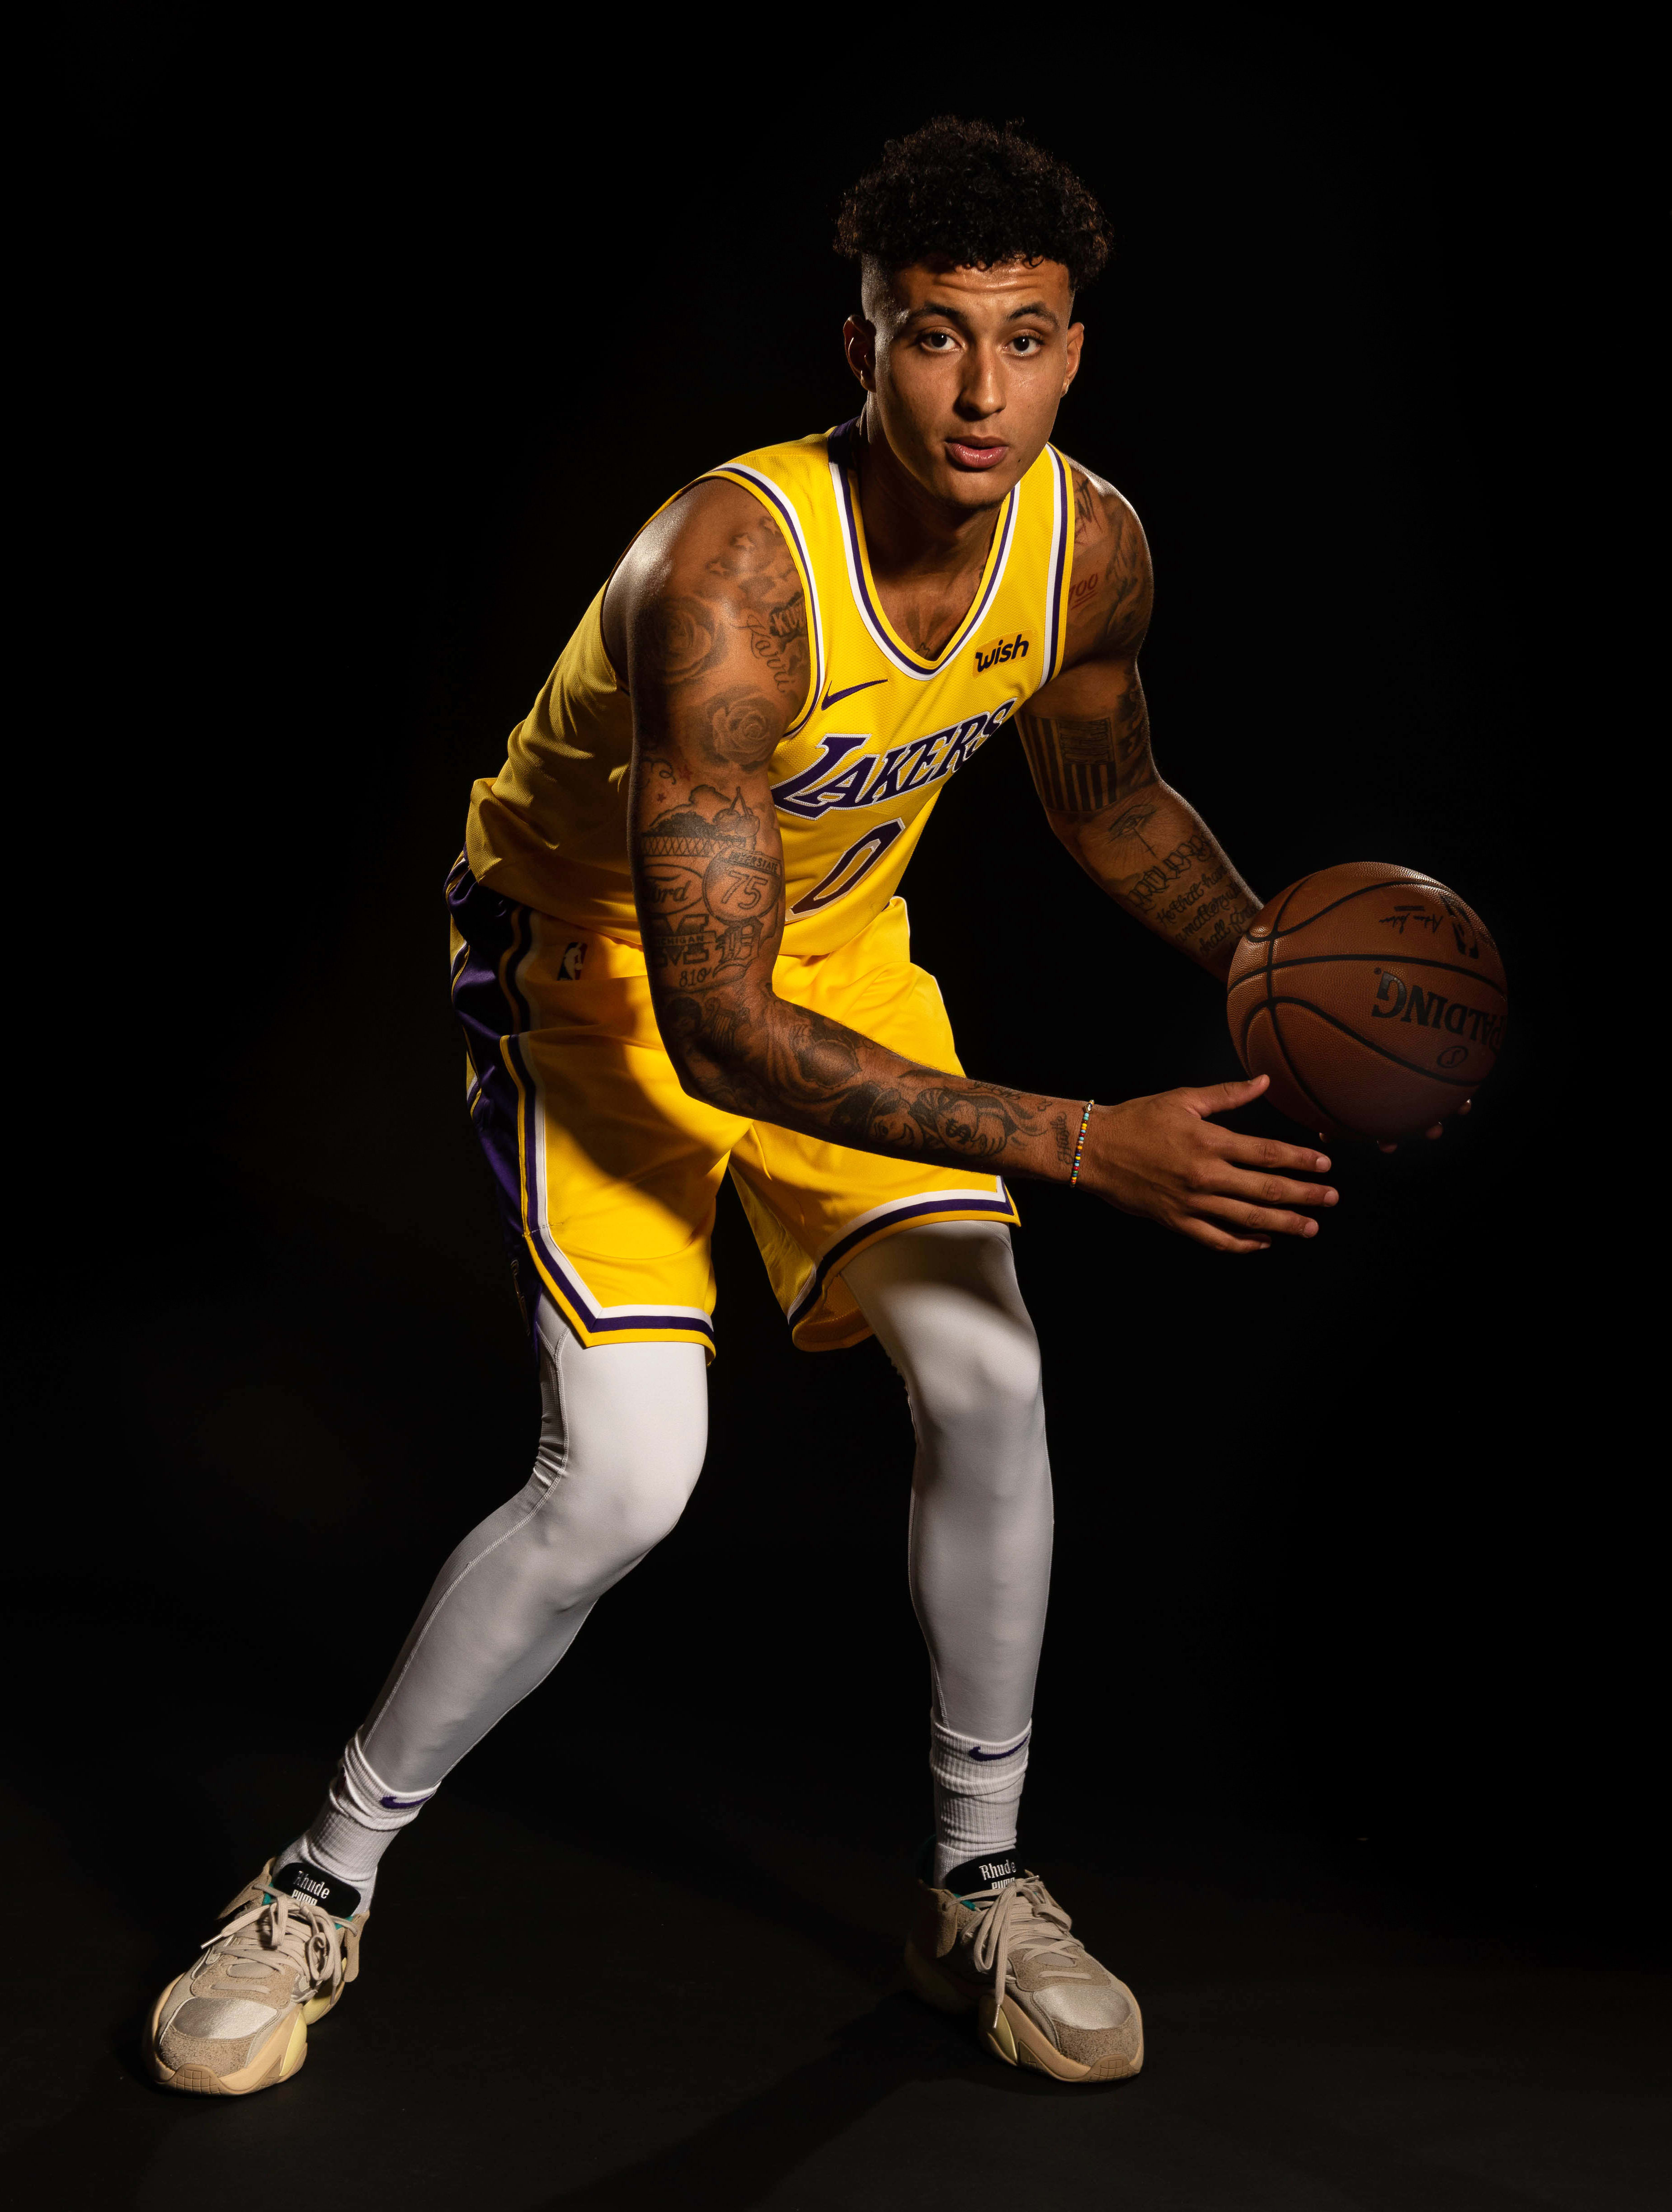 Kyle Kuzma joined Puma for increased creative control, wants to